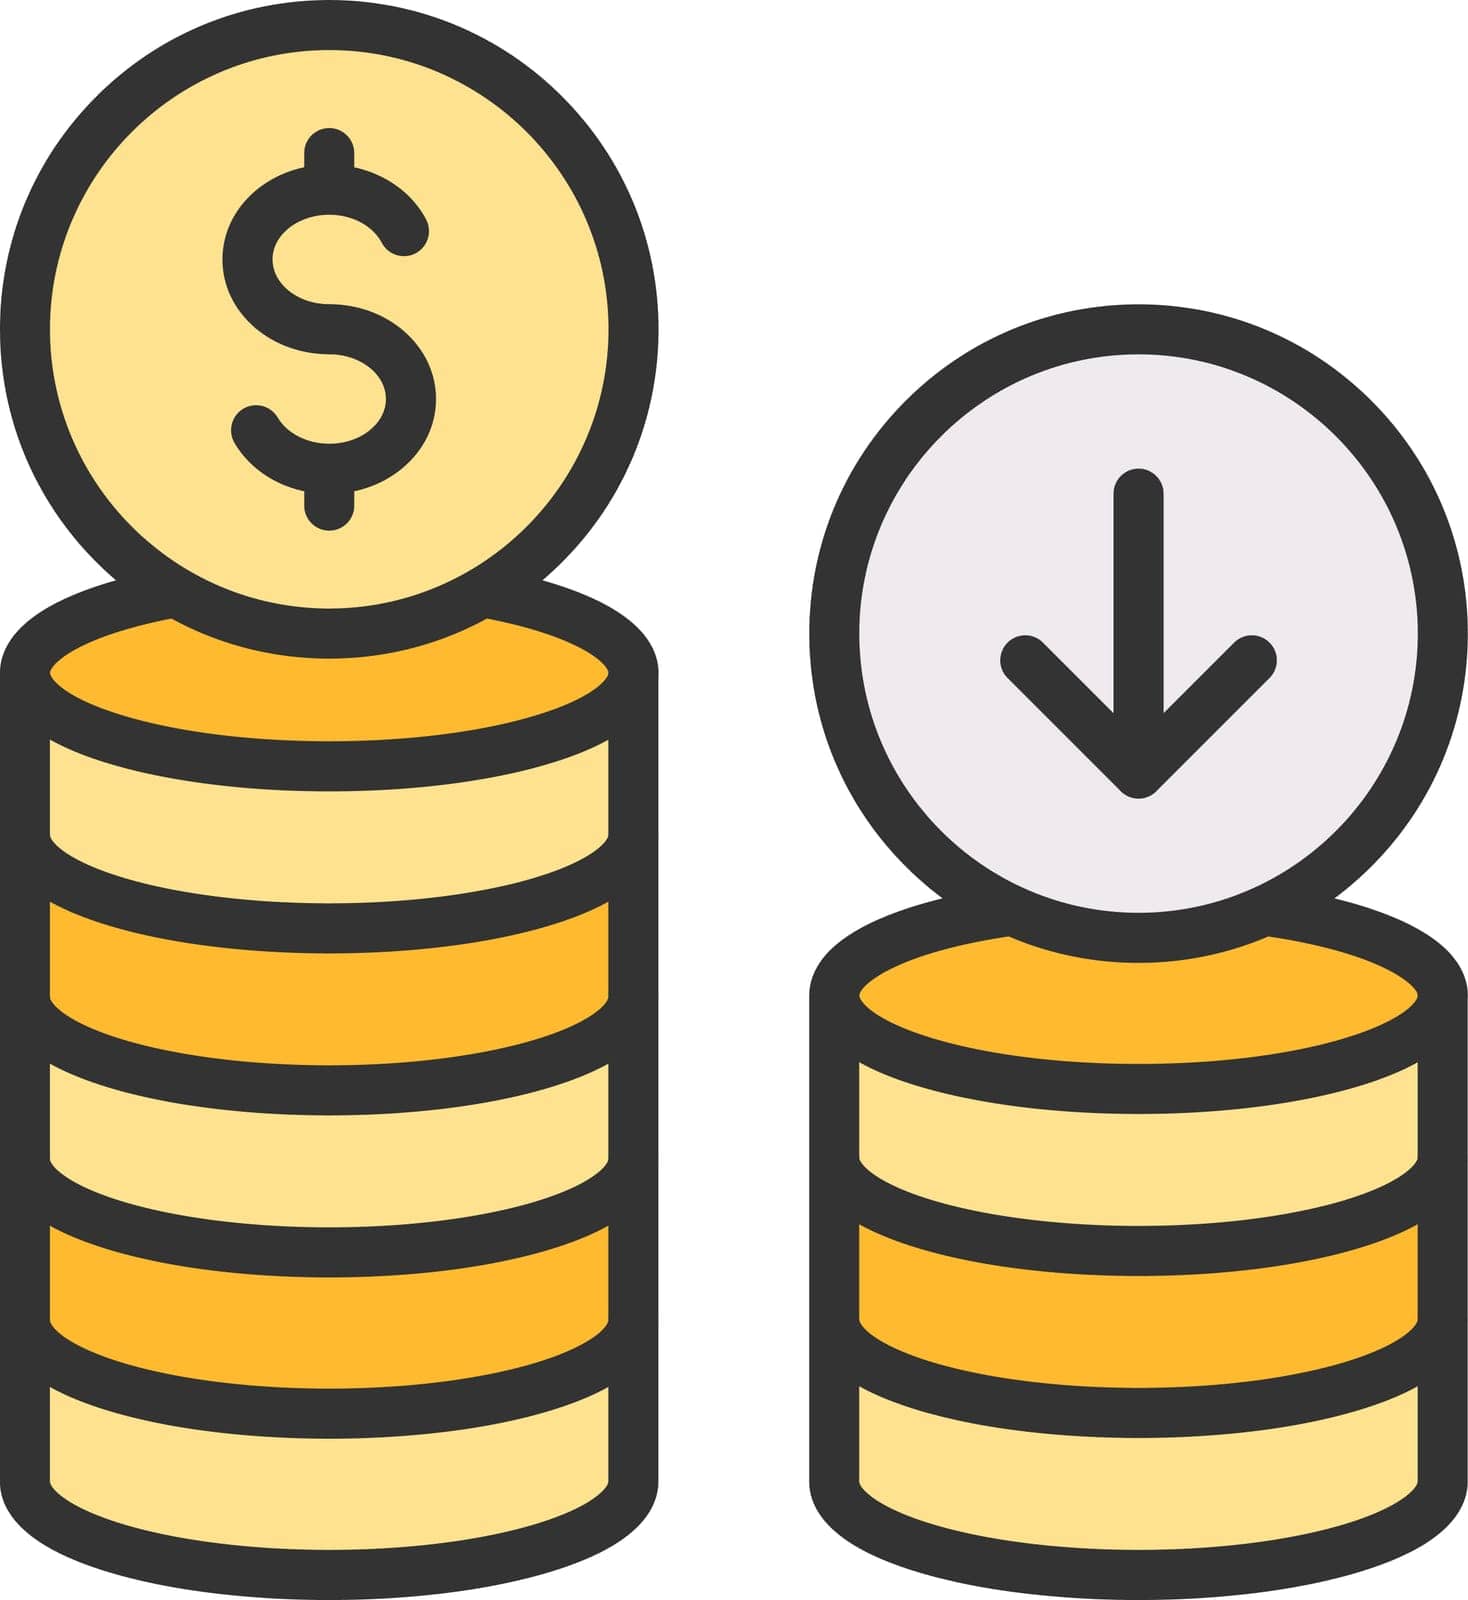 Bankrupt icon vector image. Suitable for mobile application web application and print media.